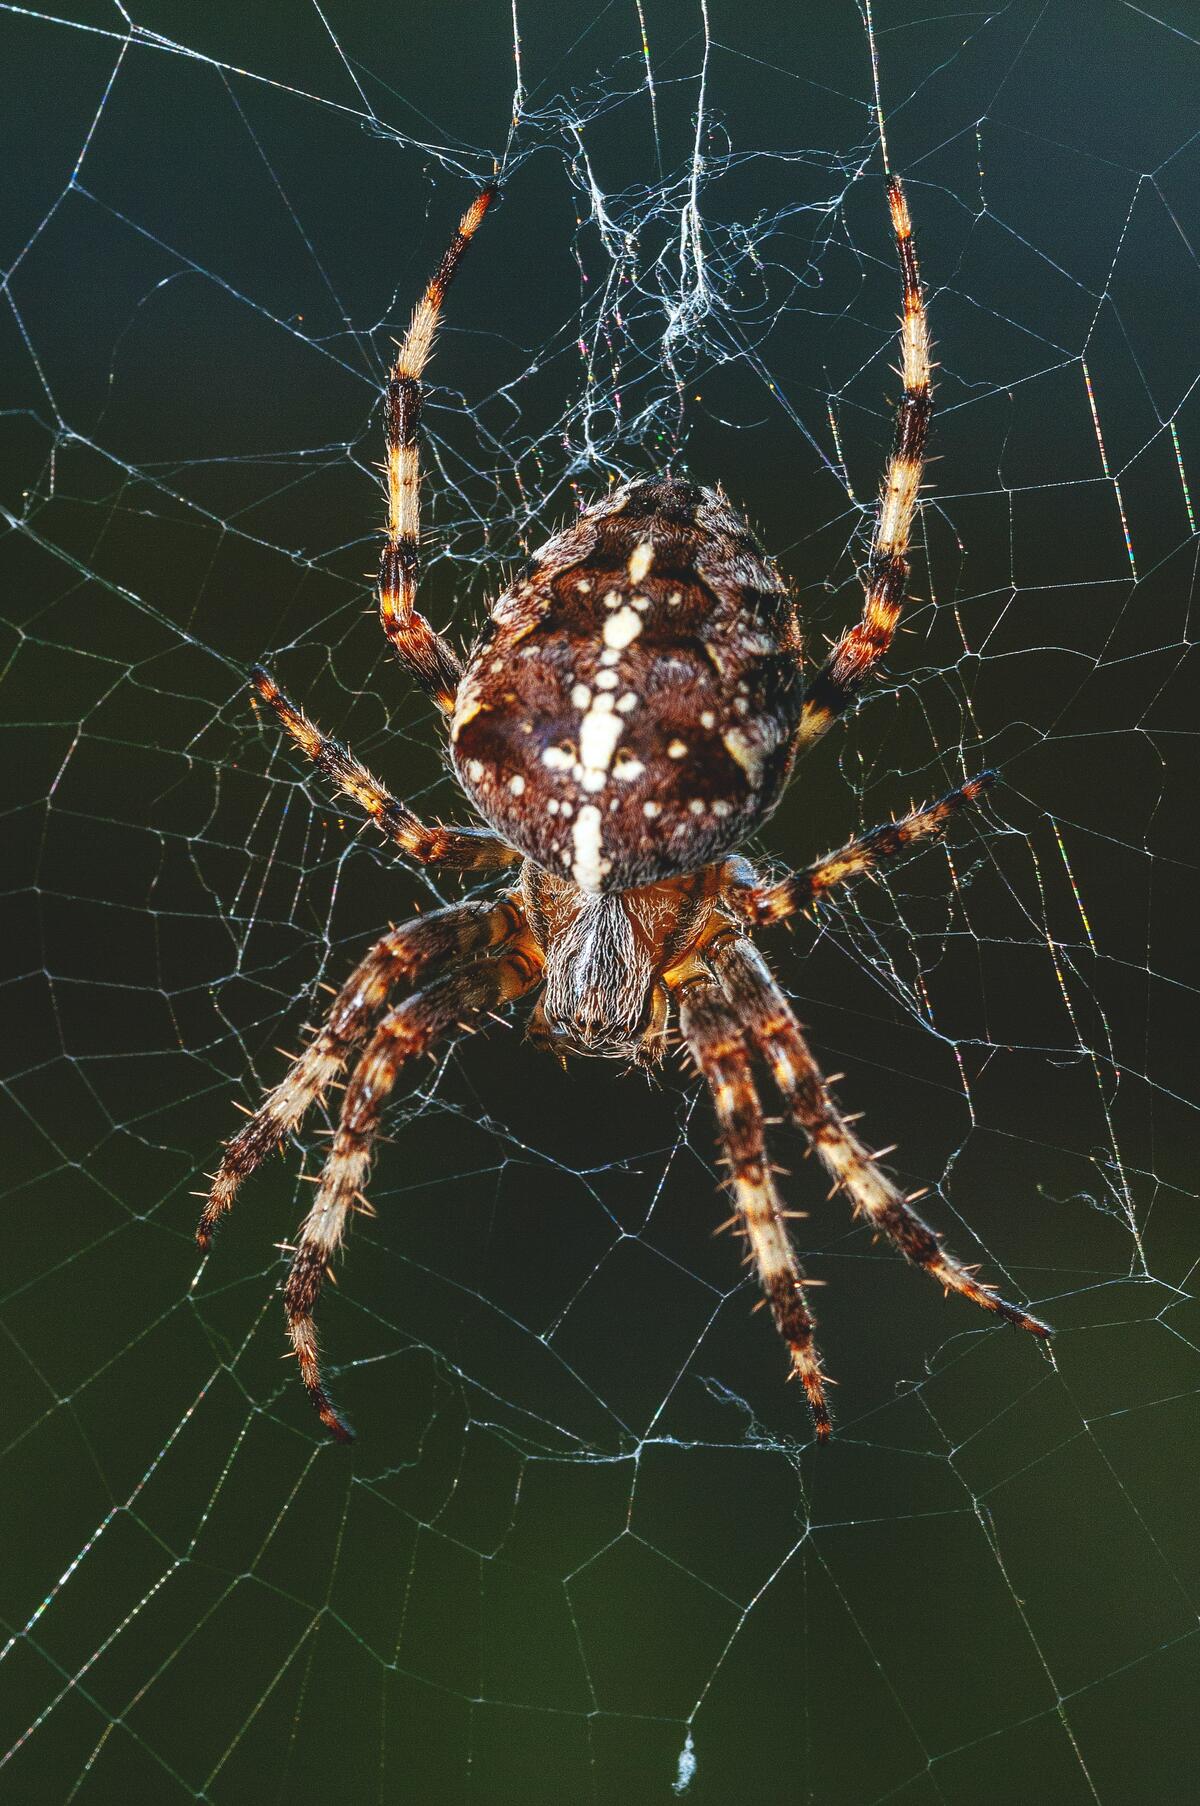 A spider sits in ambush on a woven web